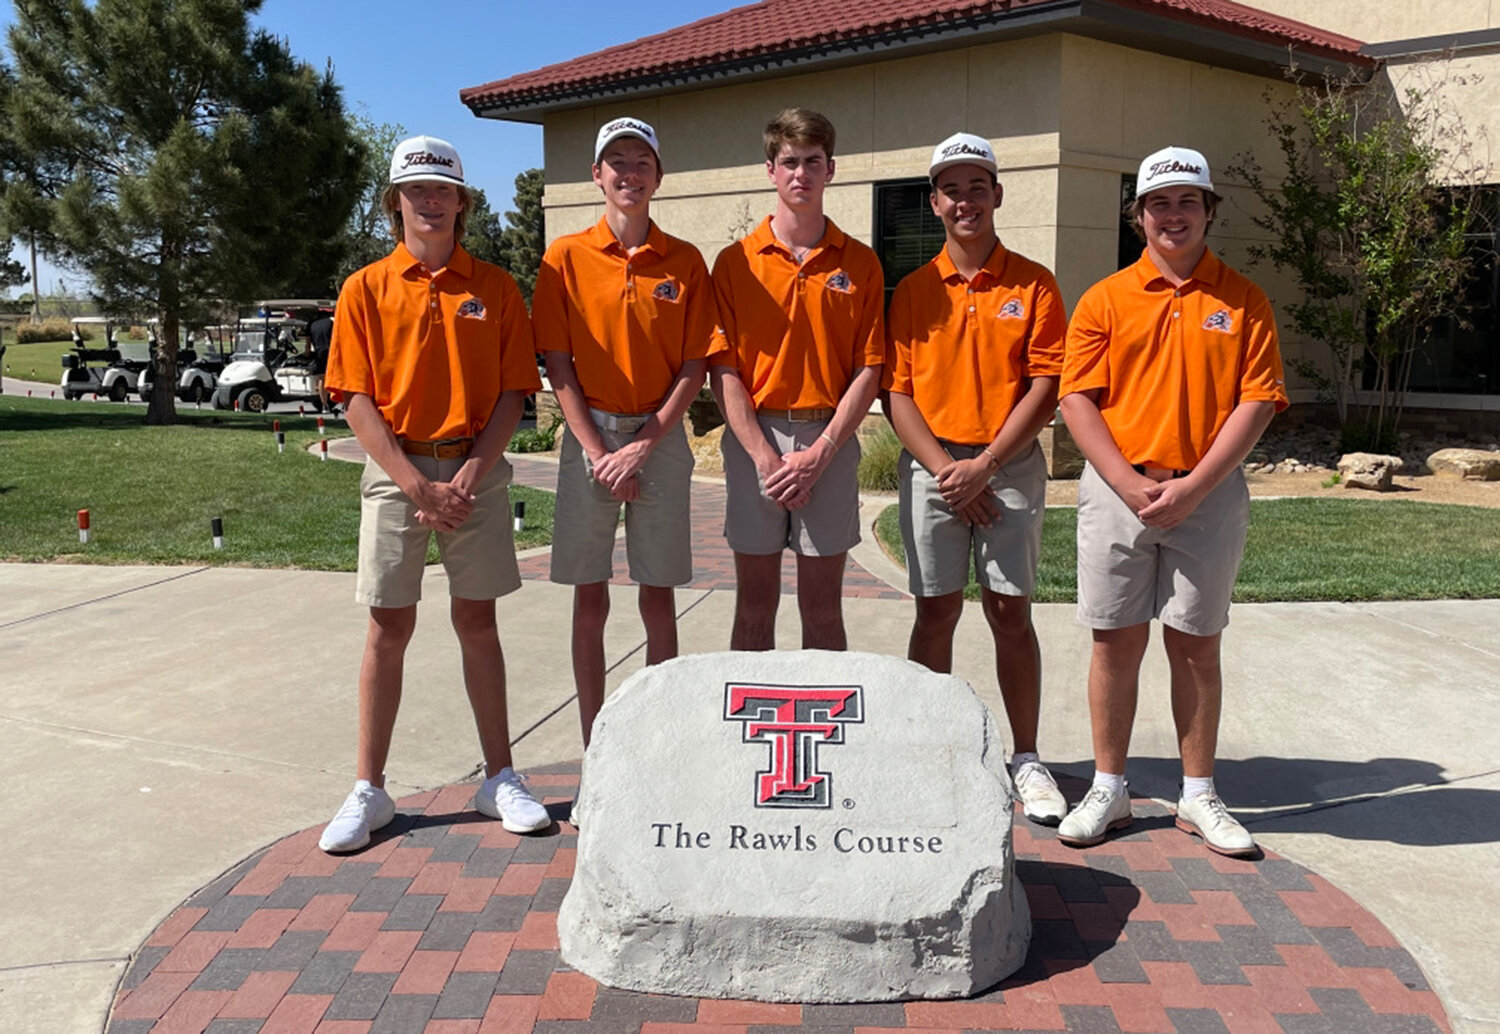 The Aledo Bearcats finished fourth at the 5A Region 1 Boys Golf Tournament in Lubbock. Pictured are (from left) Grayson Freeman, Dylan Kiser, Helton Mosiello, Braylon Mahanay and Jett Moore.